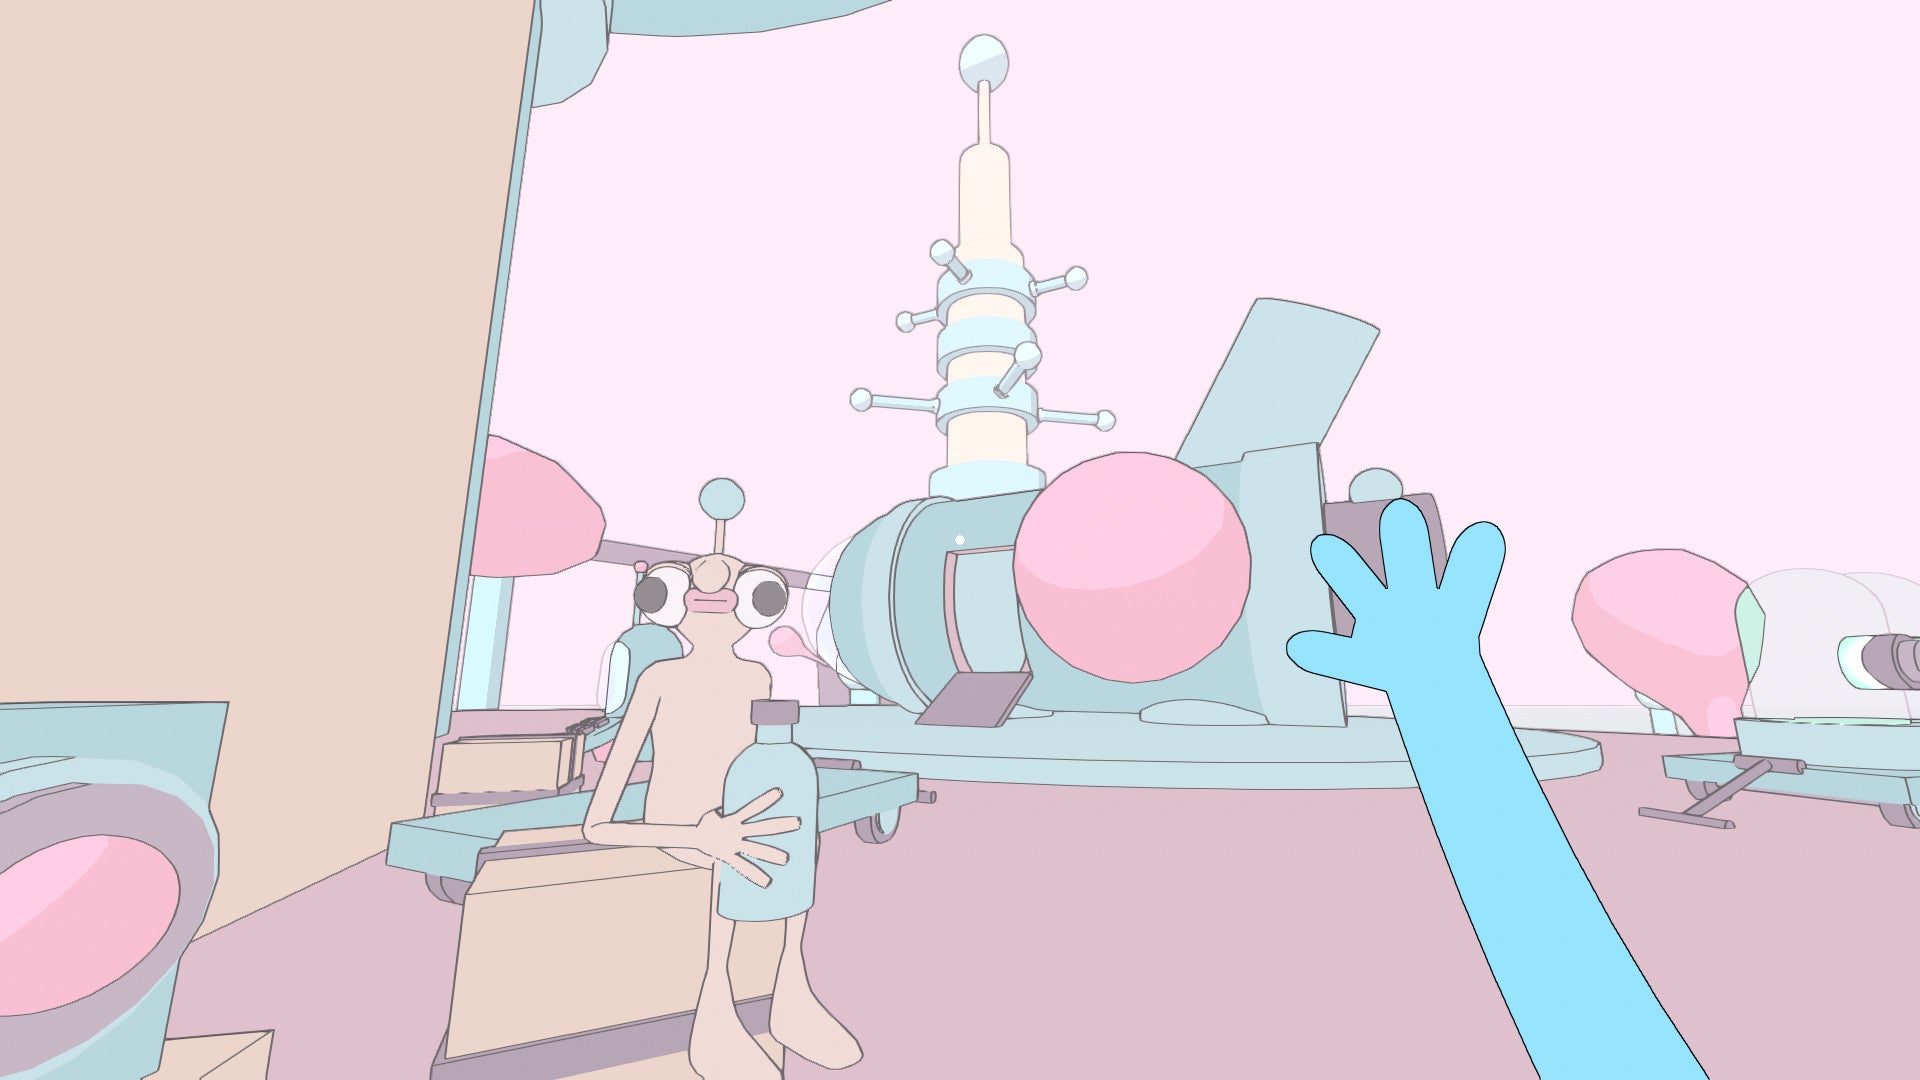 A screenshot of Completely Stretchy And Uncomfortably Sticky showing a pale-coloured, flat-textured world with what looks like a rocket ship and next to it an odd-looking man holding a water bottle.